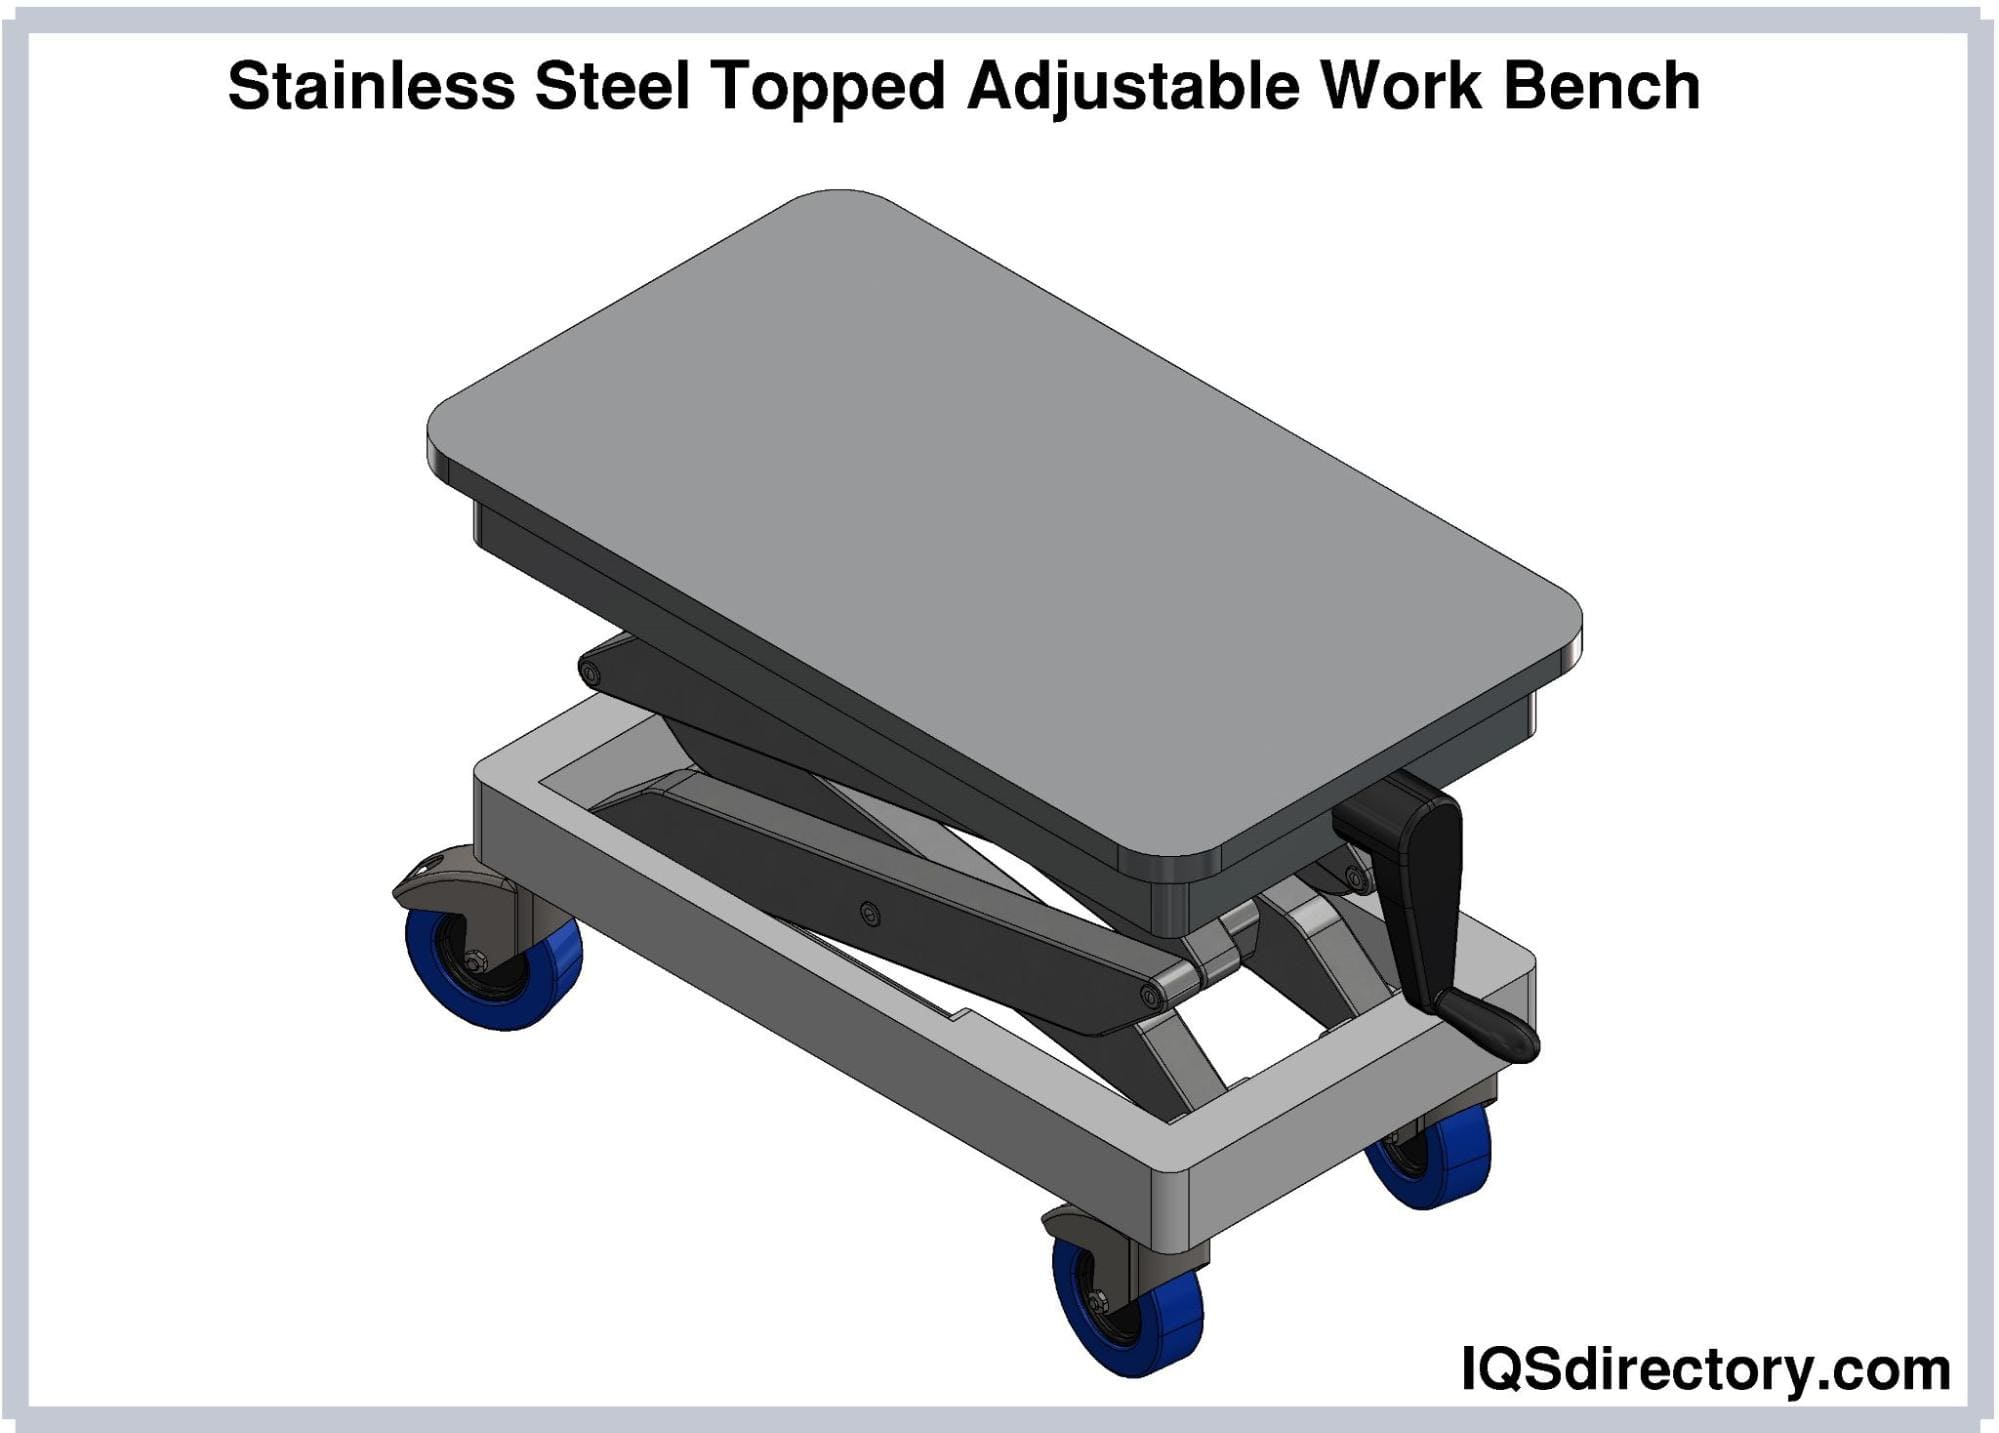 Stainless Steel Topped Adjustable Work Bench